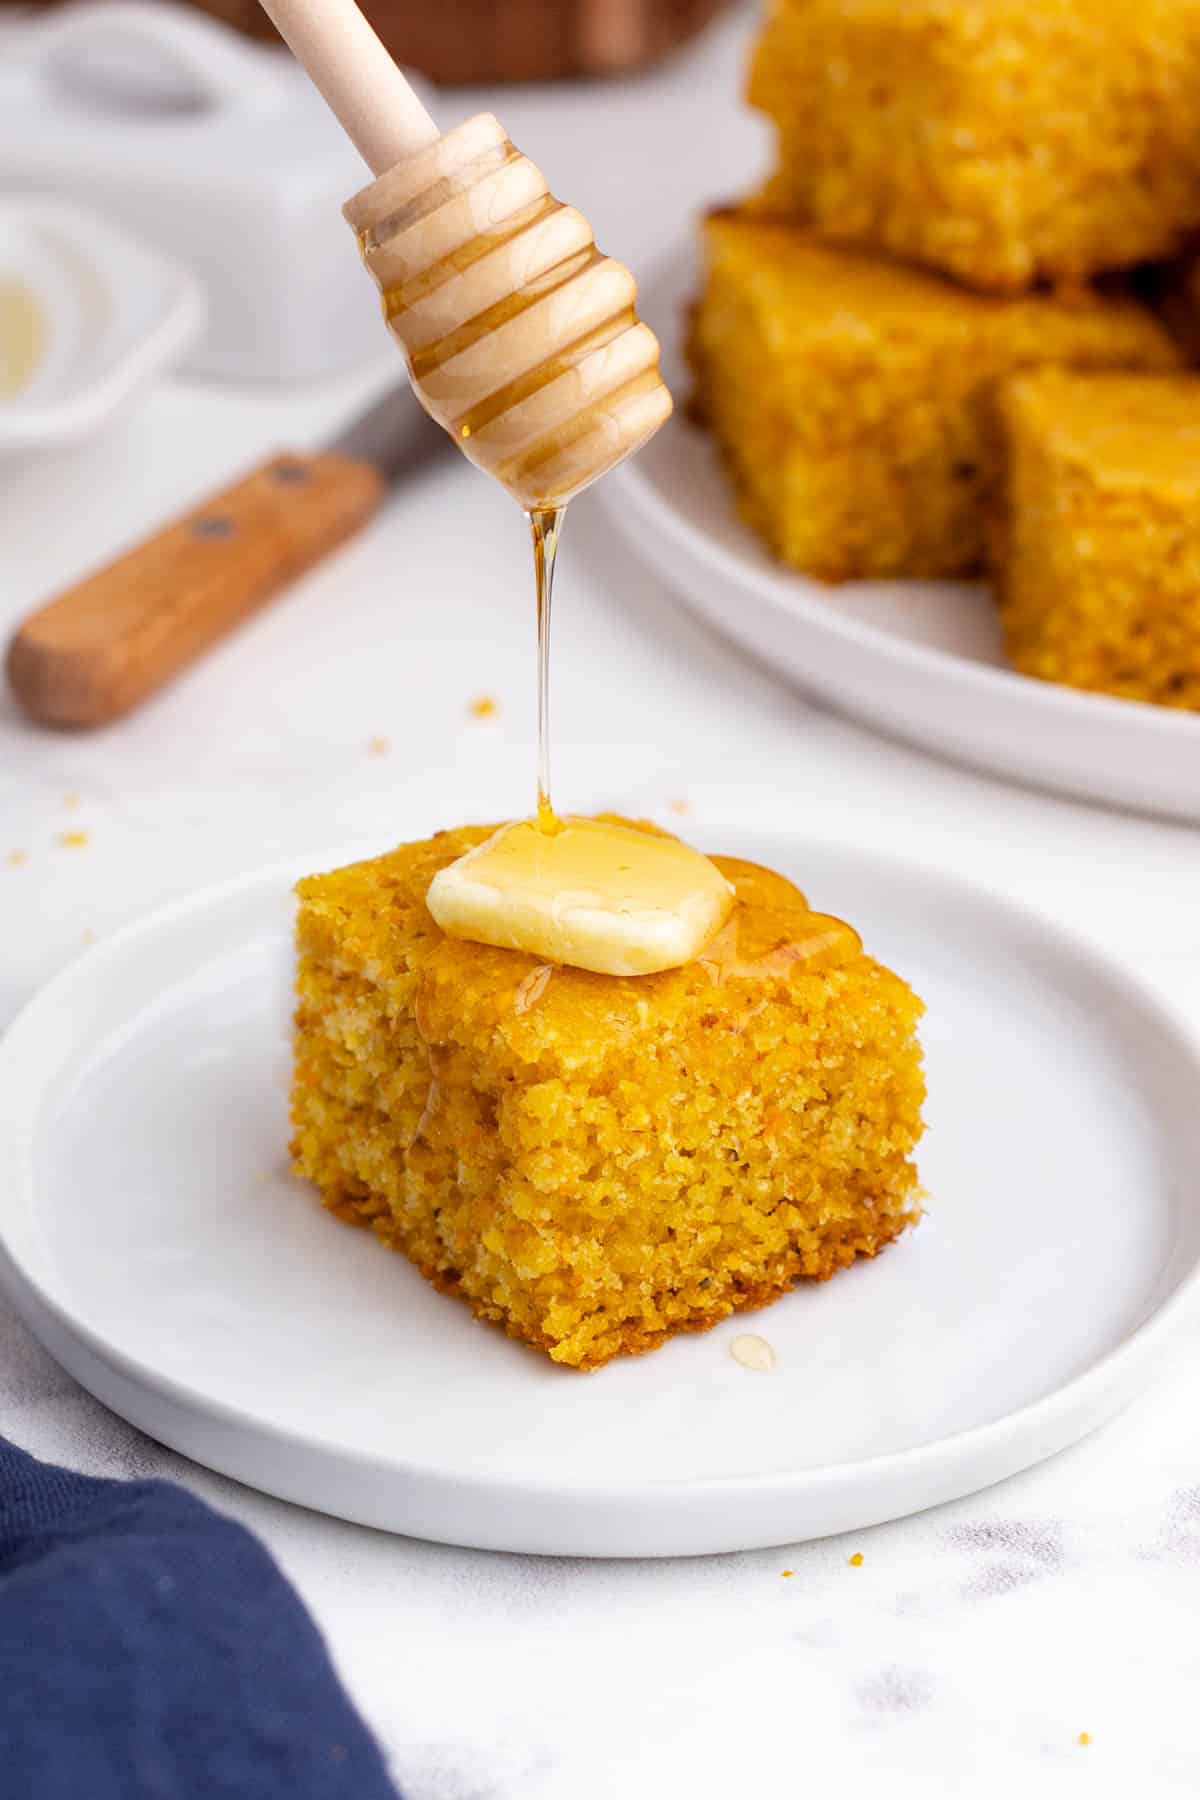 Honey is drizzled over a slice of cornbread.